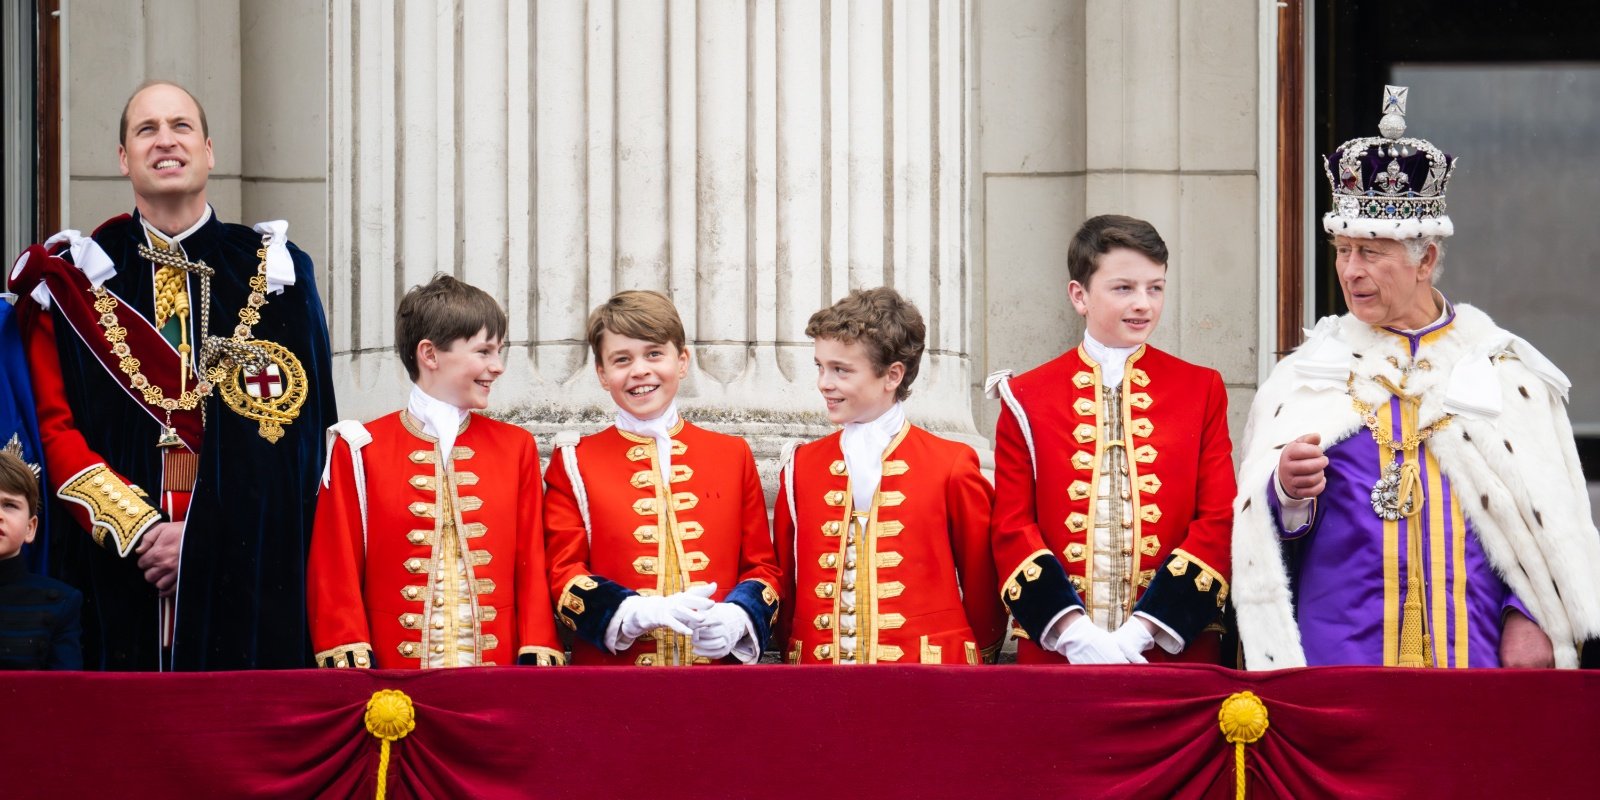 Prince William, King Charles, Prince George and other coronation pages at King Charles' investiture.